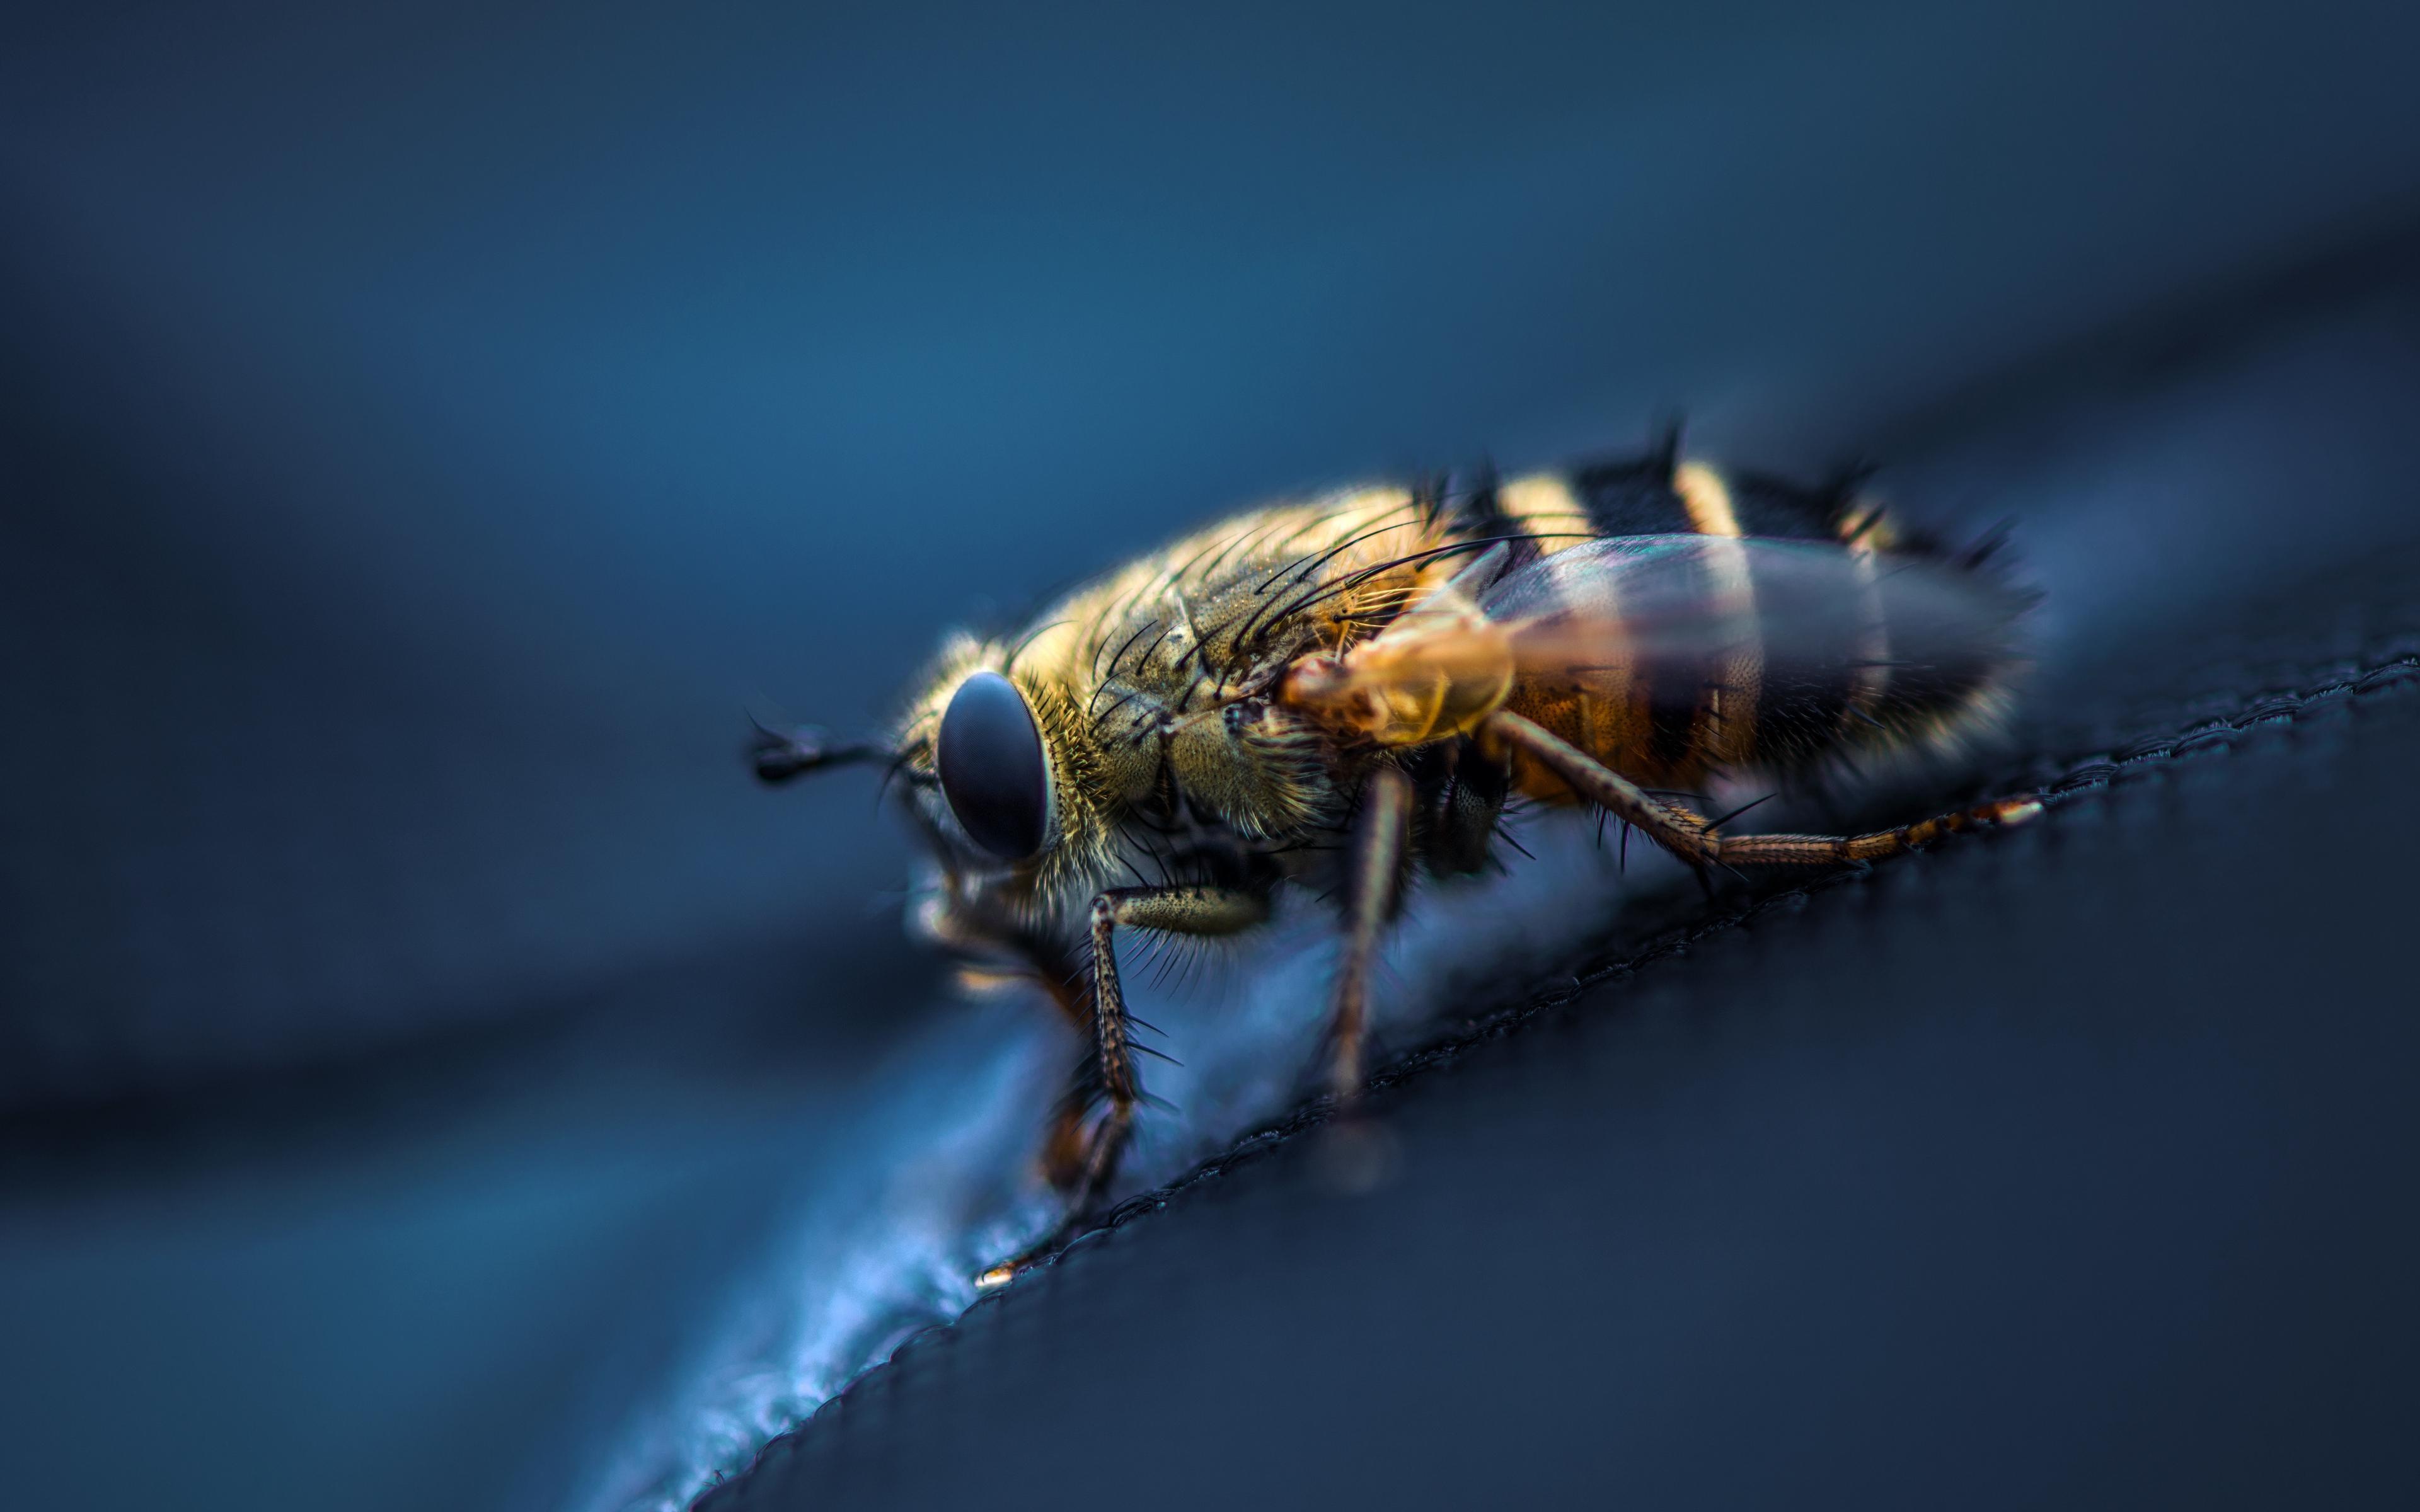 Download wallpaper 3840x2400 fly, insect, macro, eyes, wings